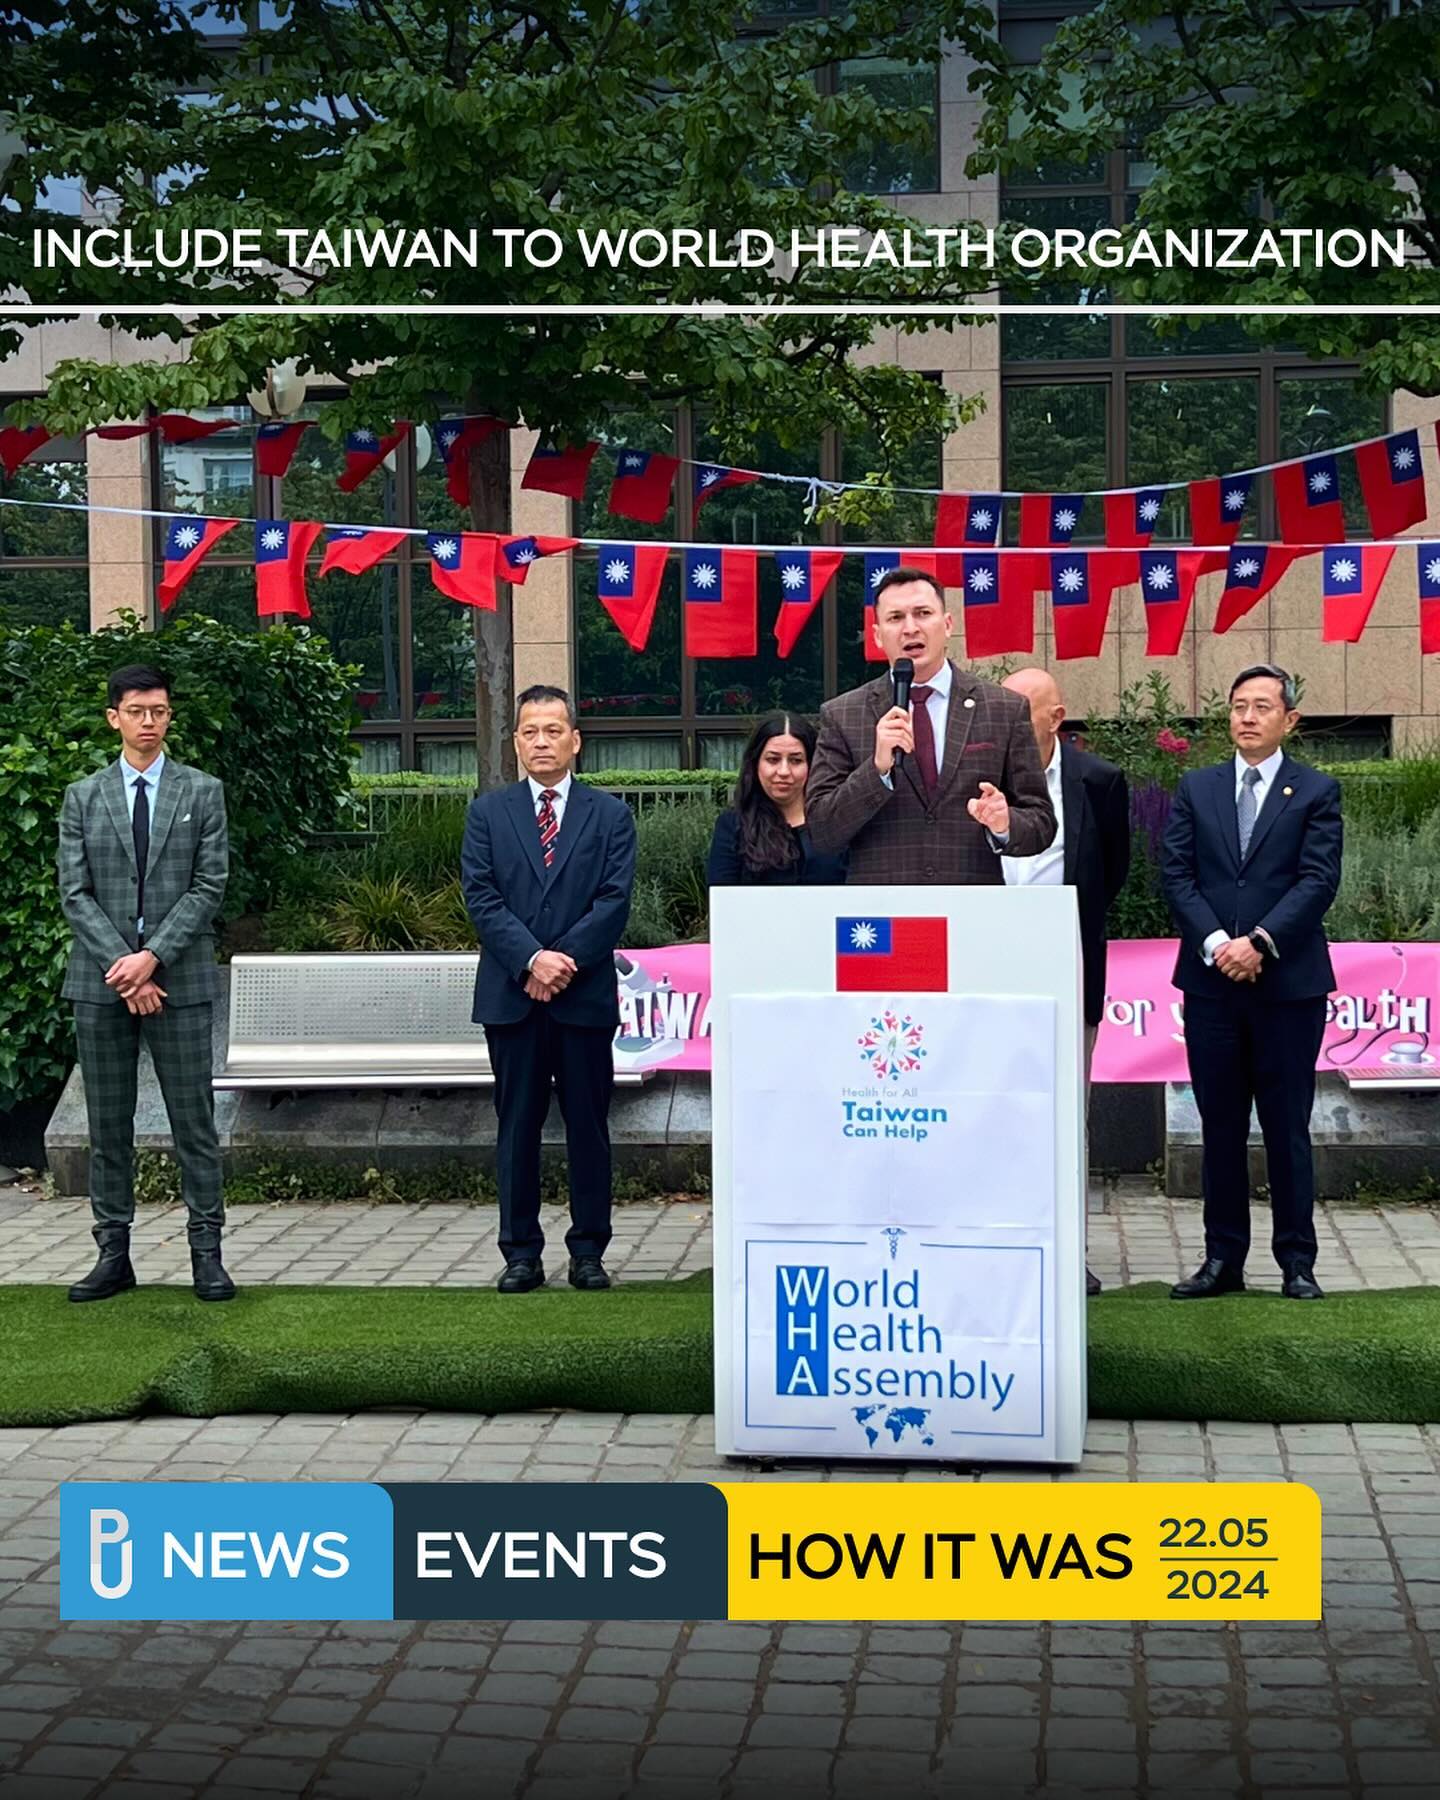 The event was aimed at drawing attention to the unfair decision of the WHO about the exclusion of Taiwan from this organization and the attempt to subordinate the activities of Taiwan to the control of China